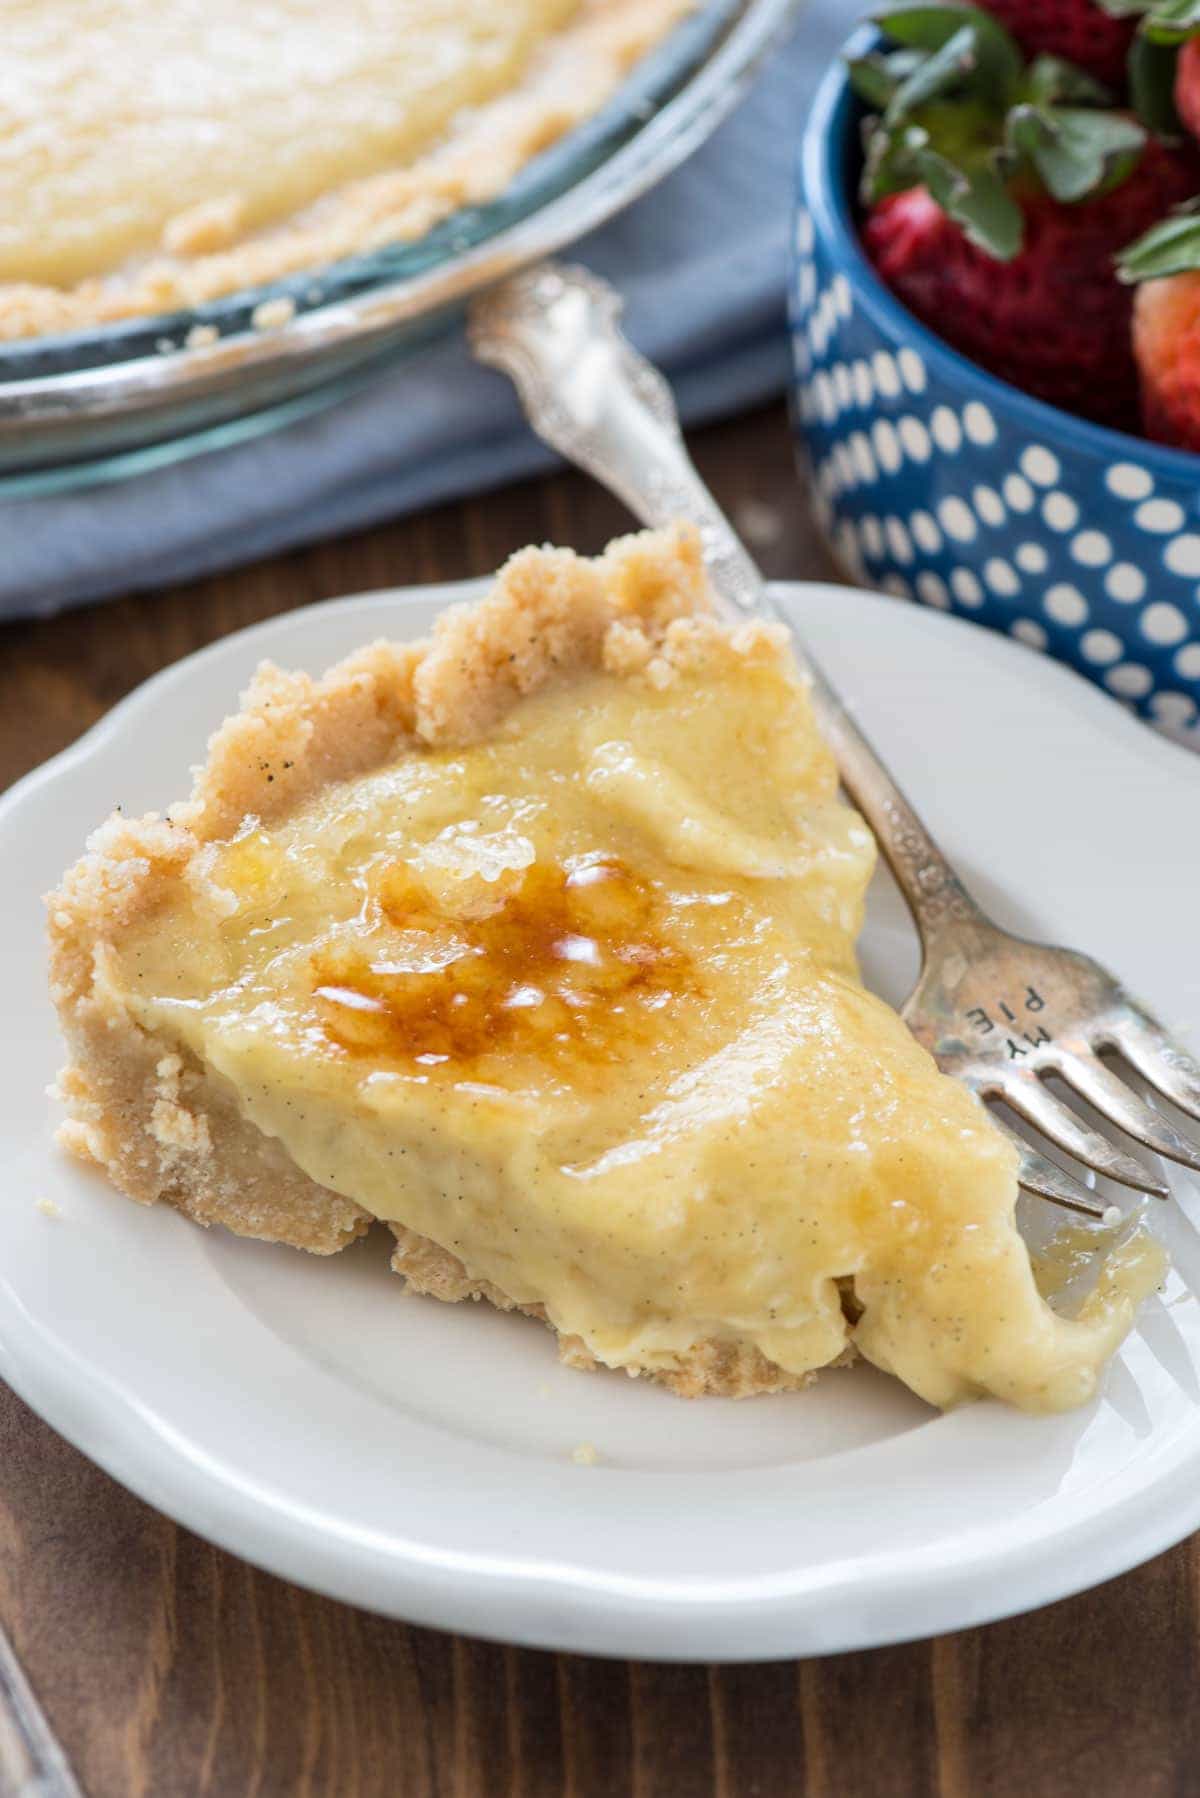 Easy No Bake Creme Brulee Pie - this pie has just a few ingredients and comes together in just minutes for my new favorite creme brulee! No oven or torch needed!